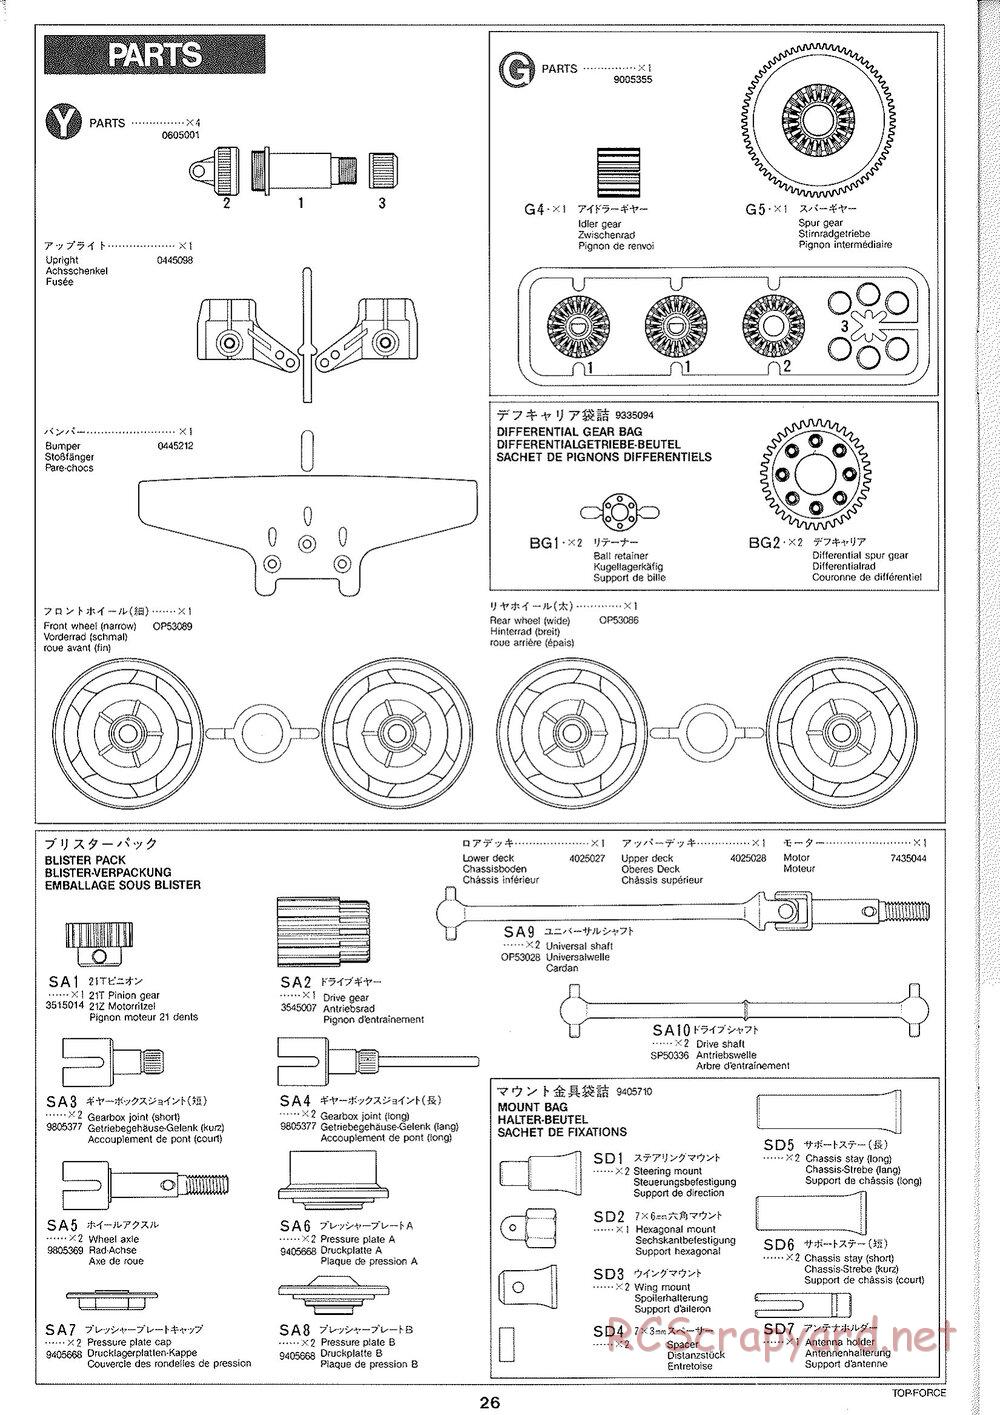 Tamiya - Top Force 2005 - DF-01 Chassis - Manual - Page 26